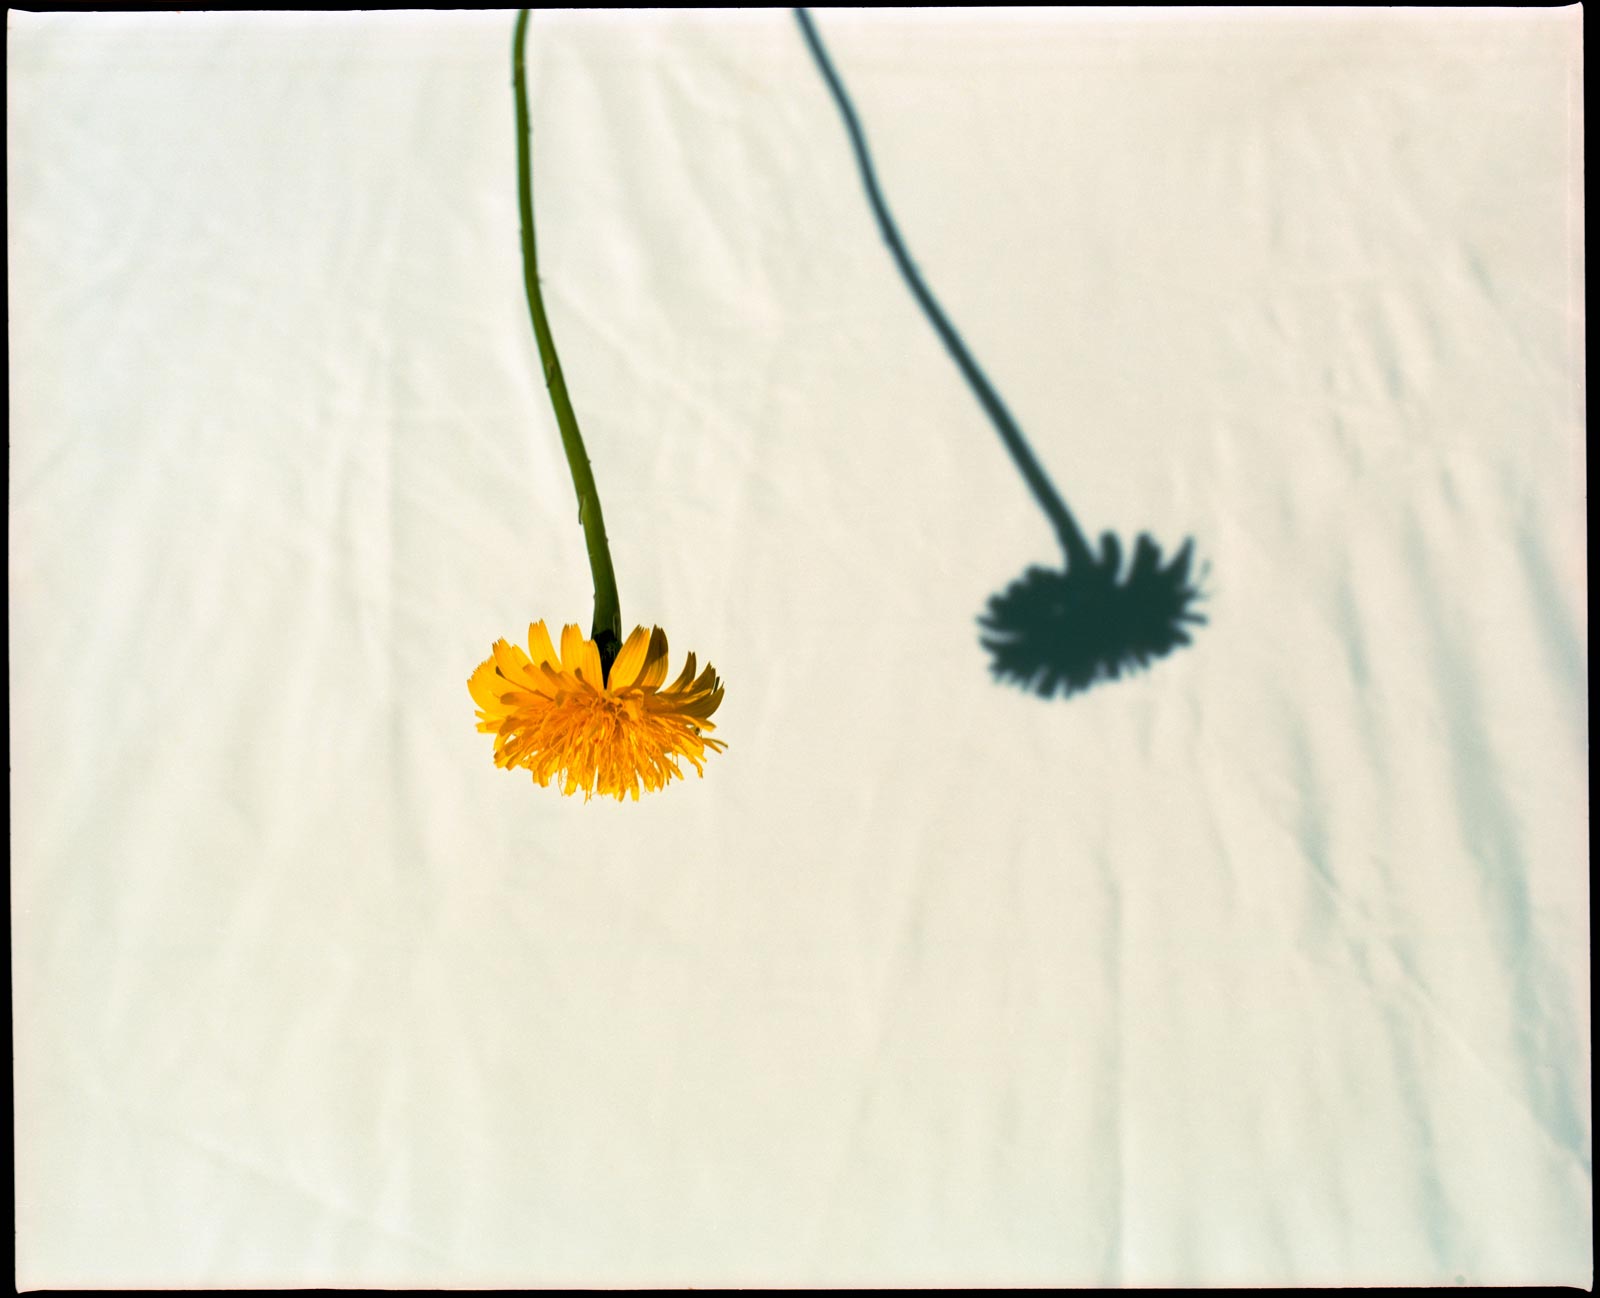 Artistic flower and shadow photo of a gerbera daisy, analogue photography.